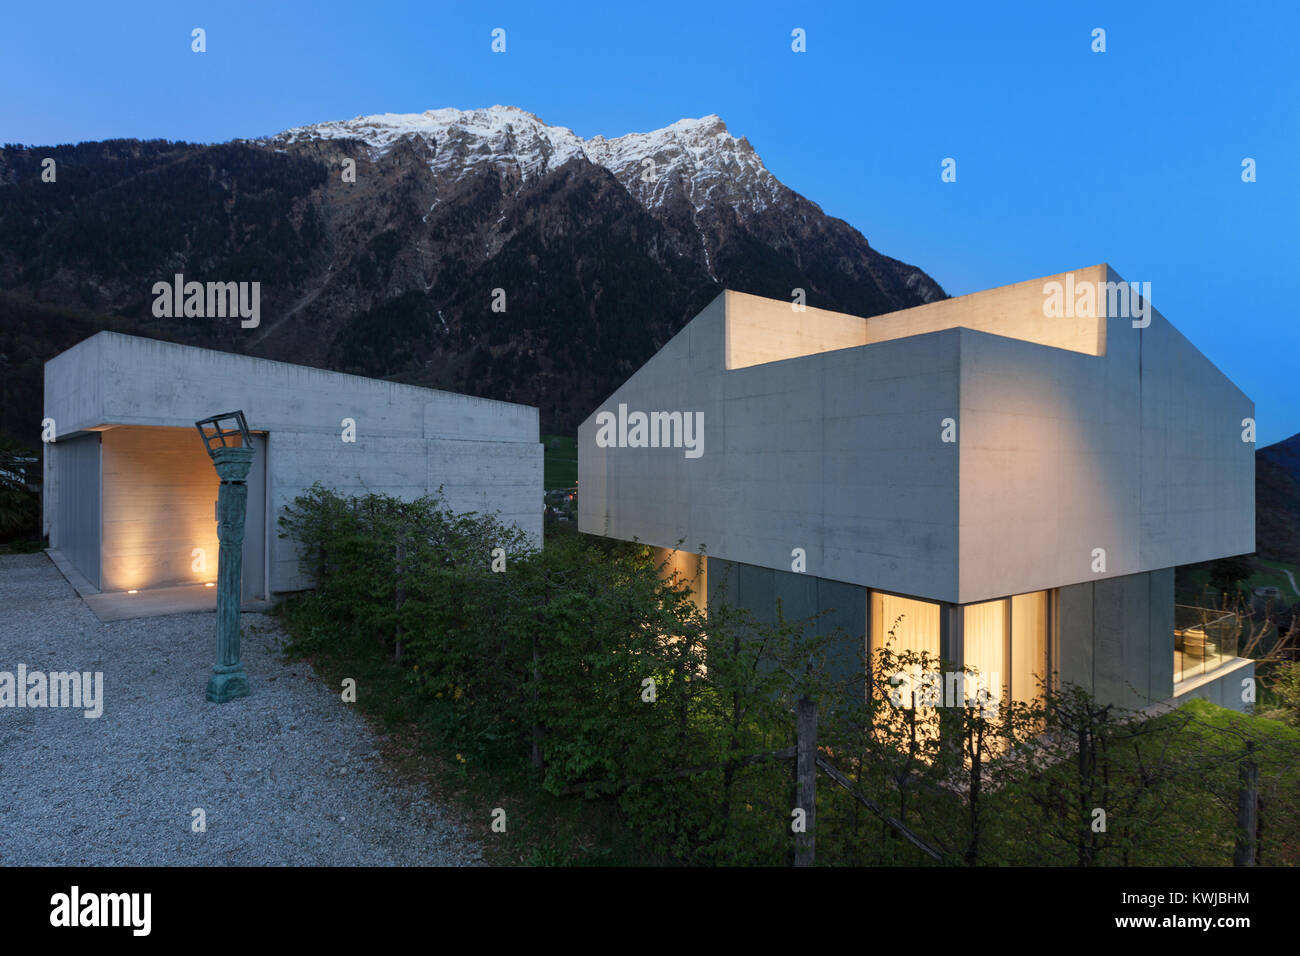 Architecture, entrance of a modern house, evening in mountain Stock Photo